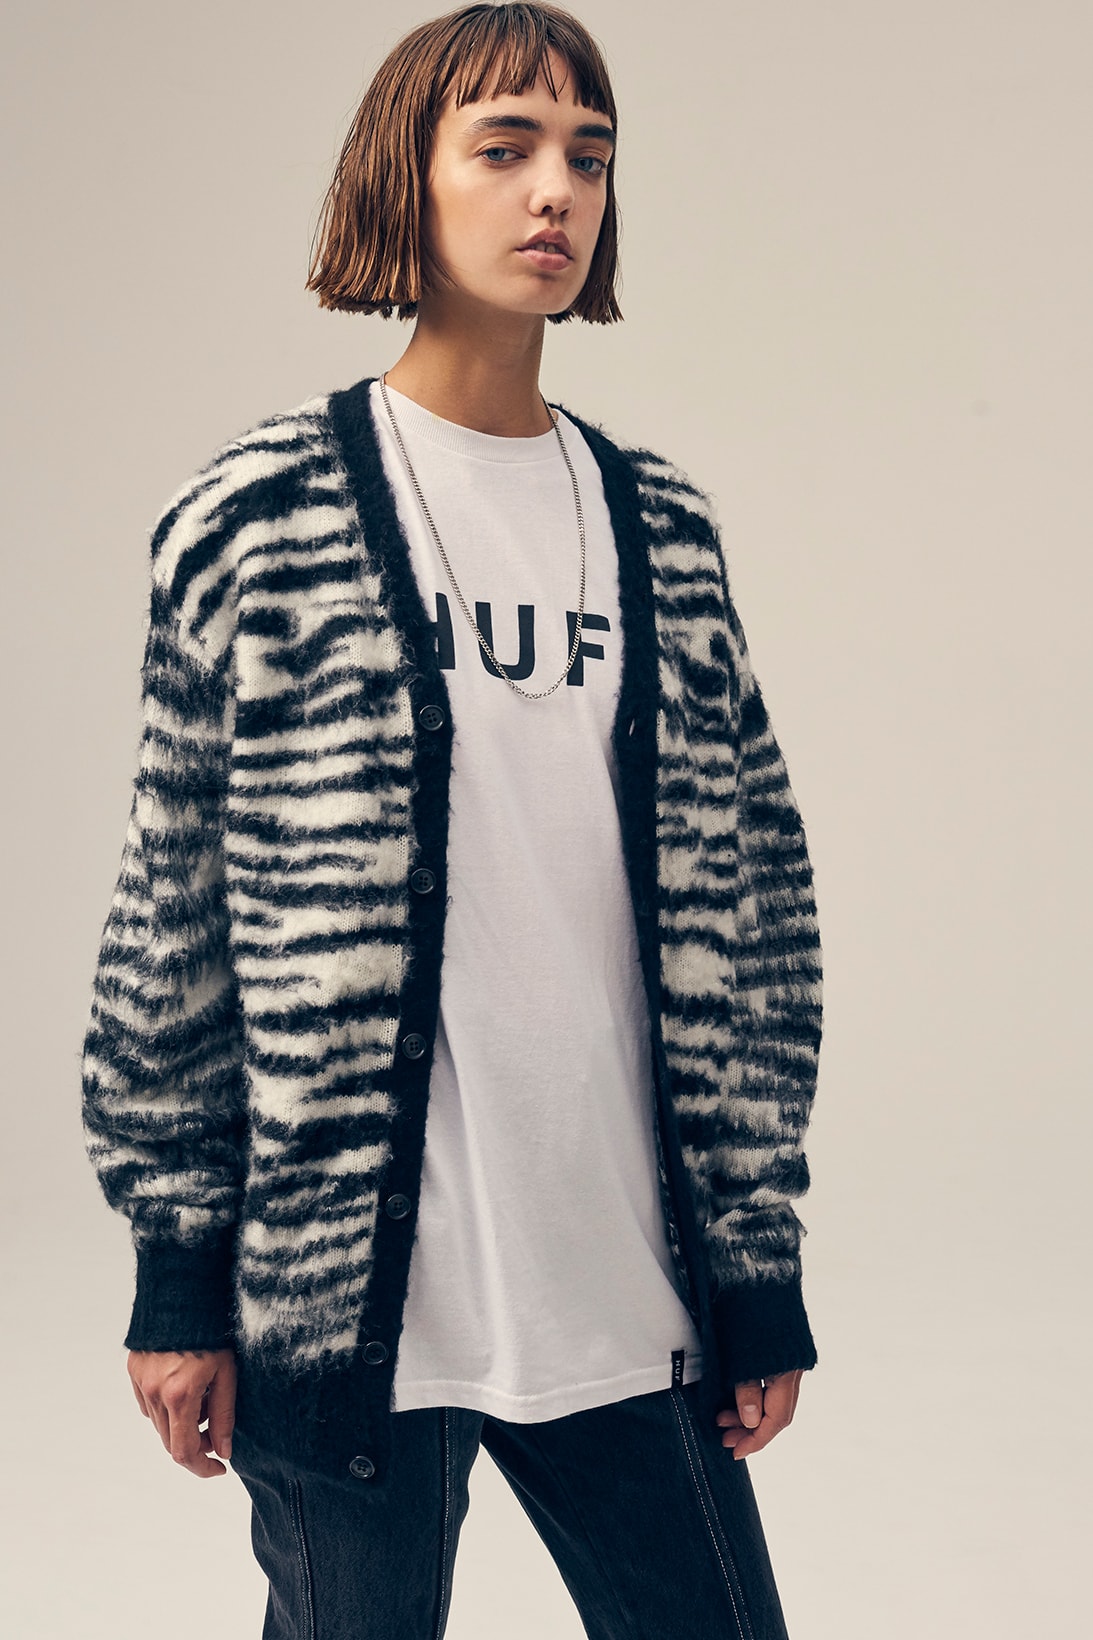 huf womens collection fall lookbook denim jackets coats jumpsuits sweaters skirts pants clothes fashion 